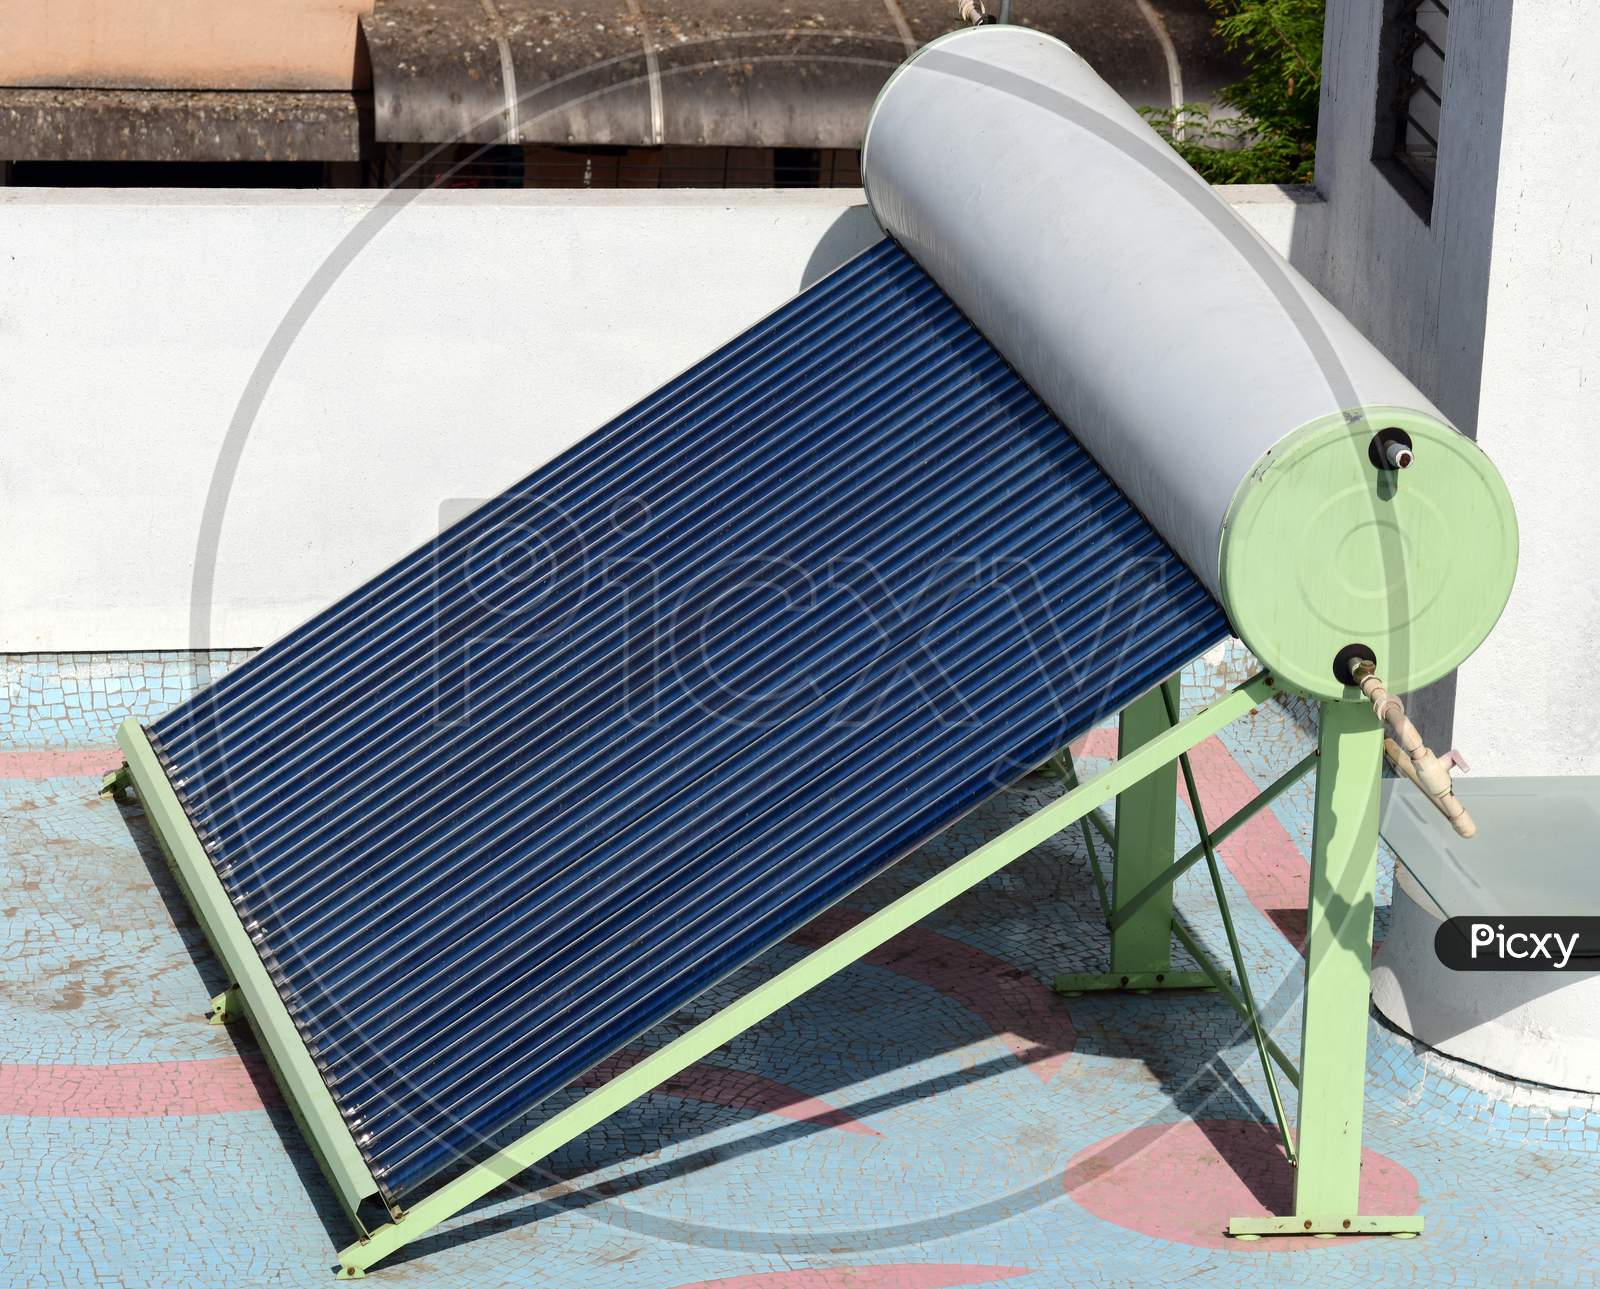 Solar Water Heater Unit Installed On The Terrace Of A Building